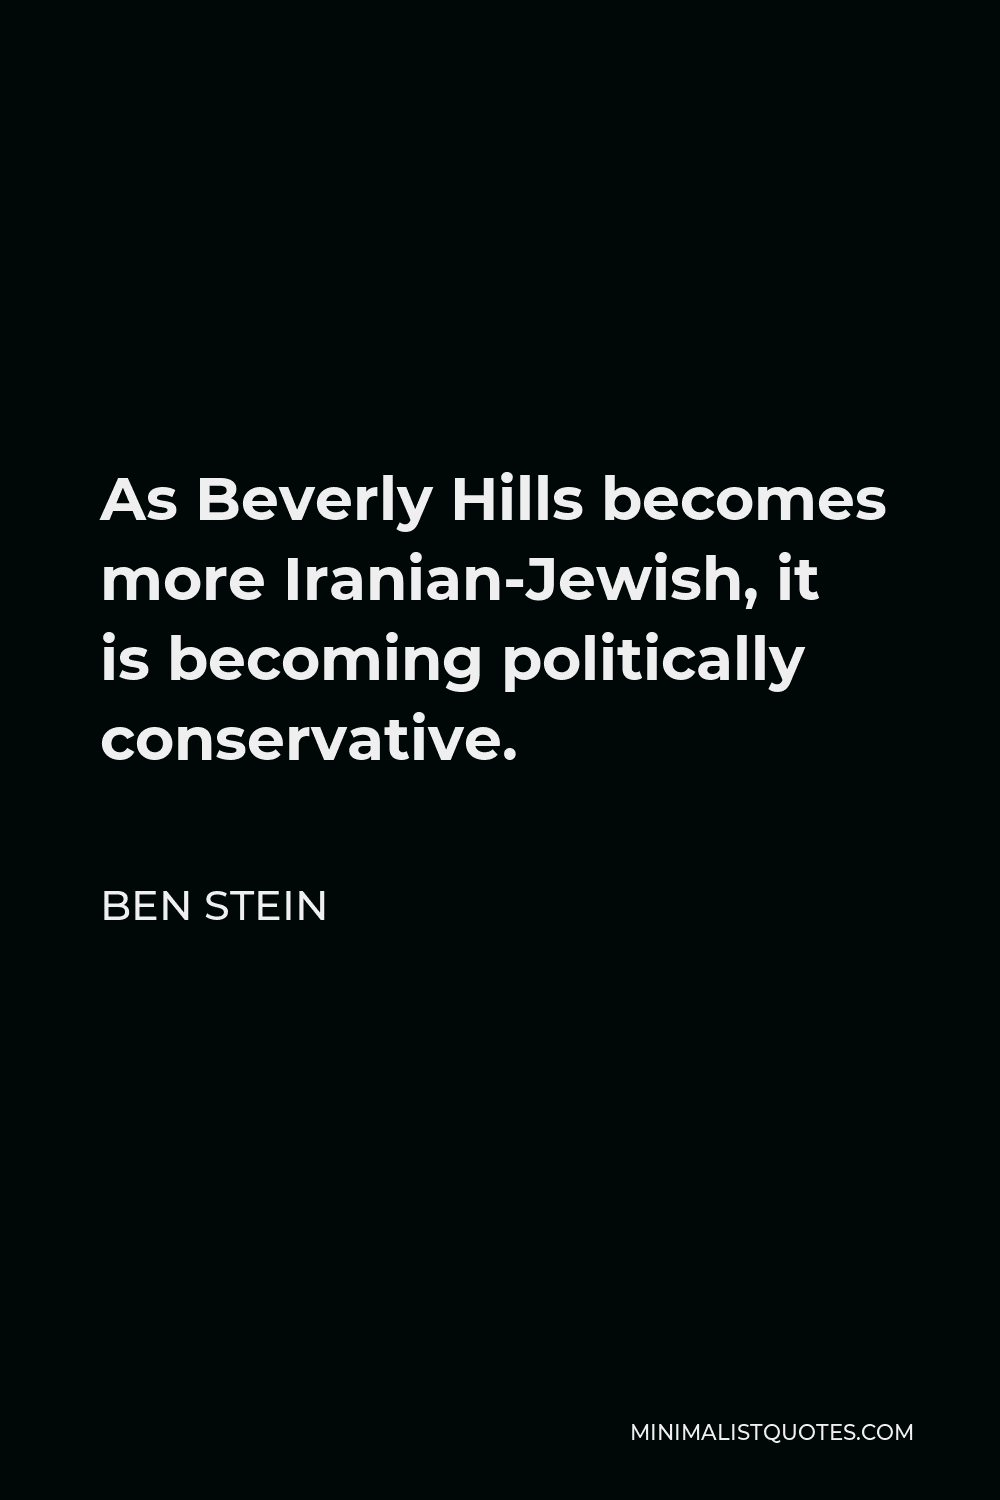 Ben Stein Quote - As Beverly Hills becomes more Iranian-Jewish, it is becoming politically conservative.